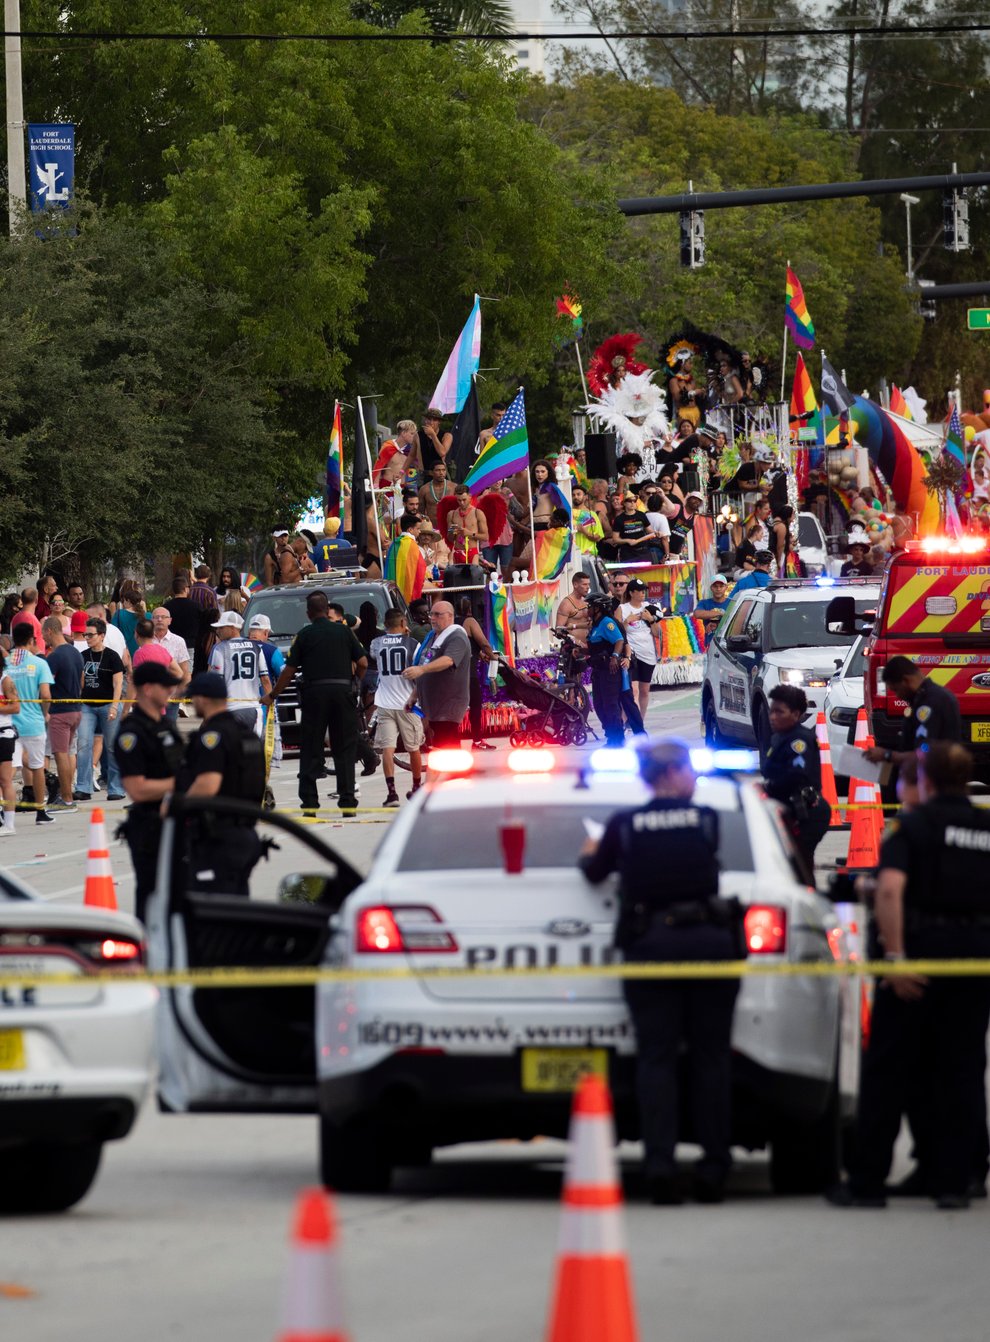 Police and firefighters respond after a truck drove into a crowd of people injuring them during The Stonewall Pride Parade and Street Festival in Wilton Manors